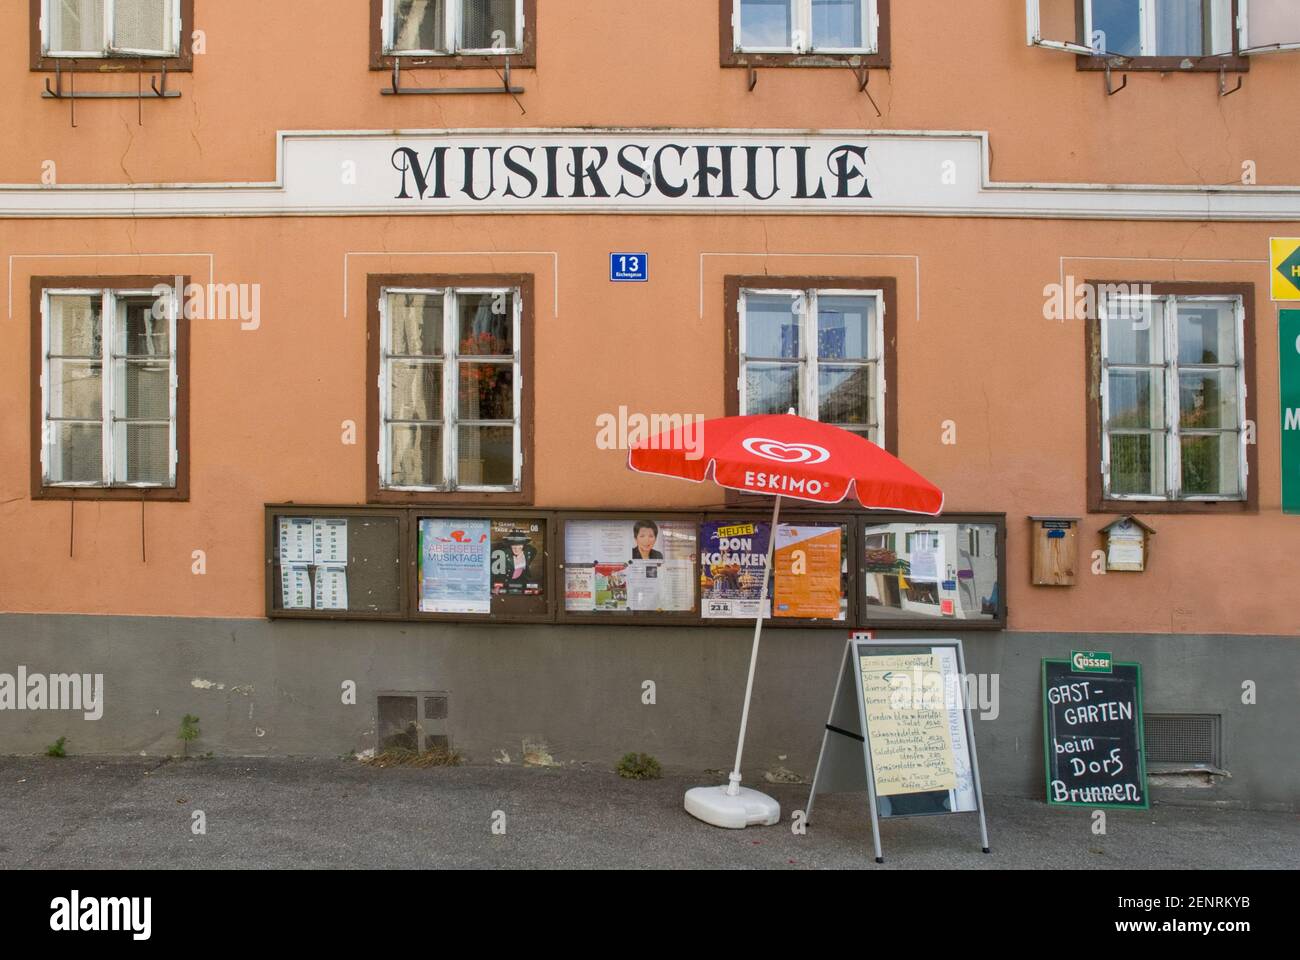 the music scholl in Bad Goisern with posters and red umbrella in front, Bad Goisern, Inner Salzkammergut, Austria Stock Photo